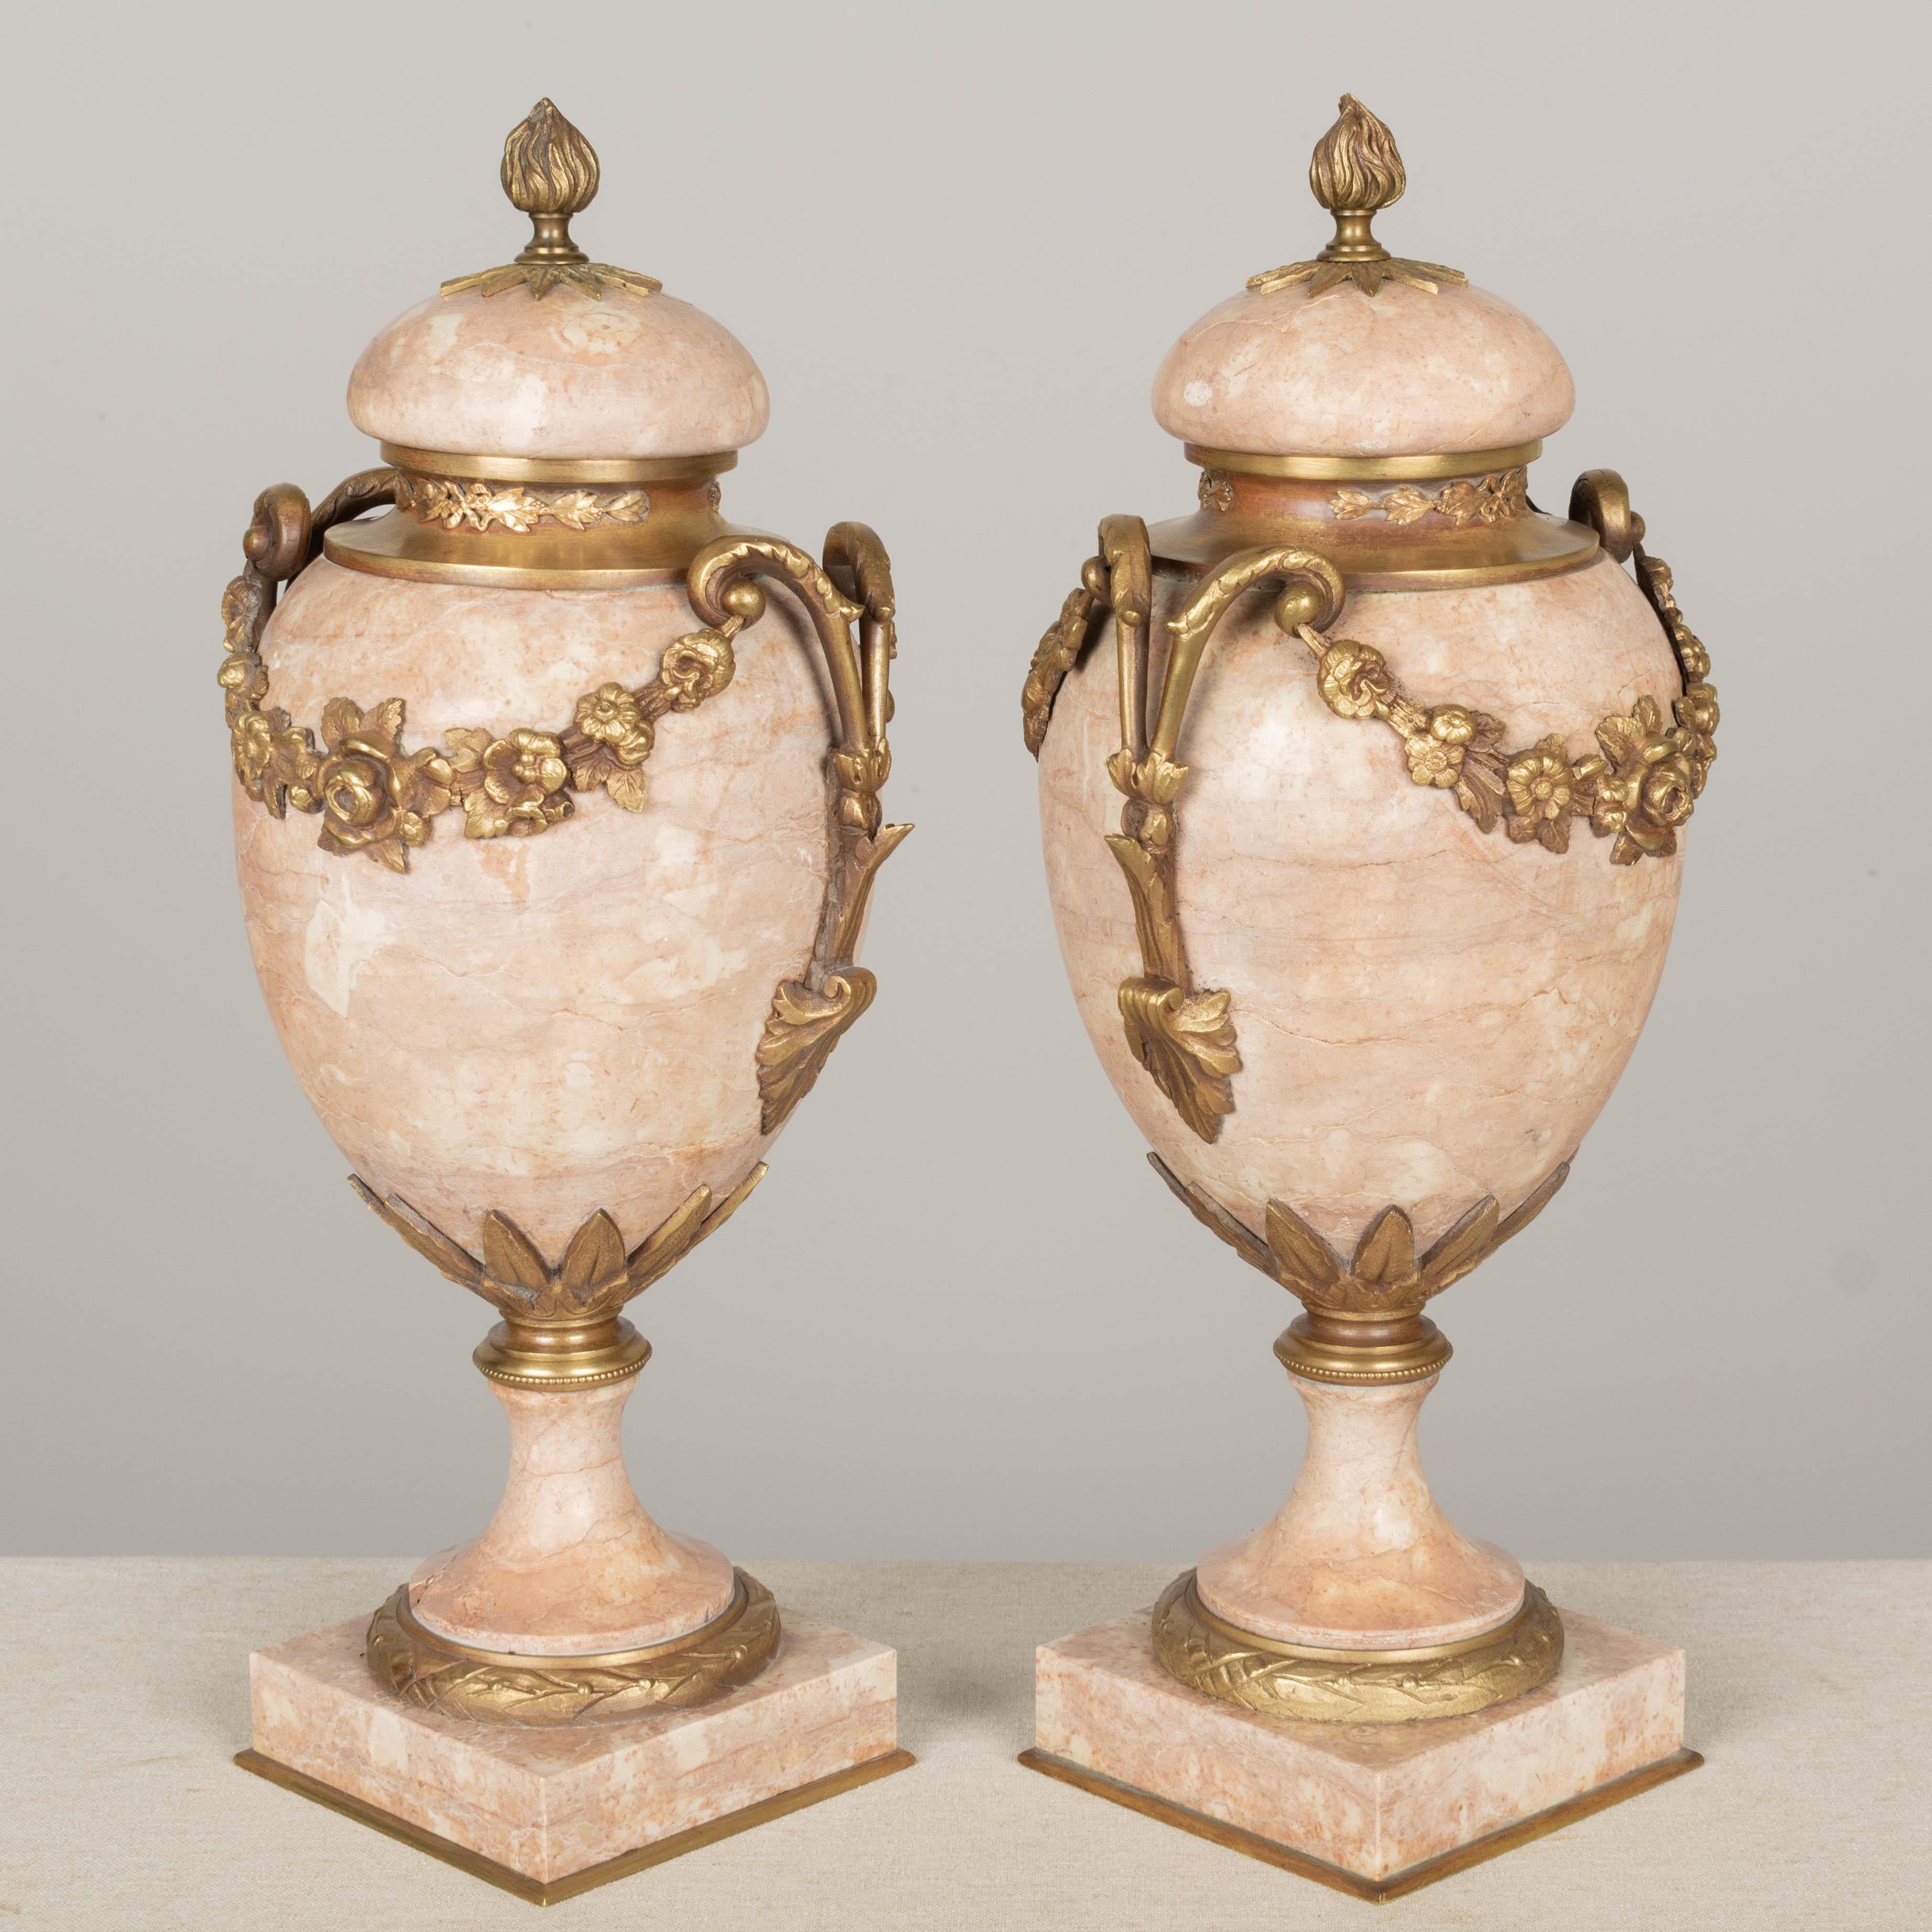 19th Century French Marble and Ormolu Cassolettes Pair For Sale 2